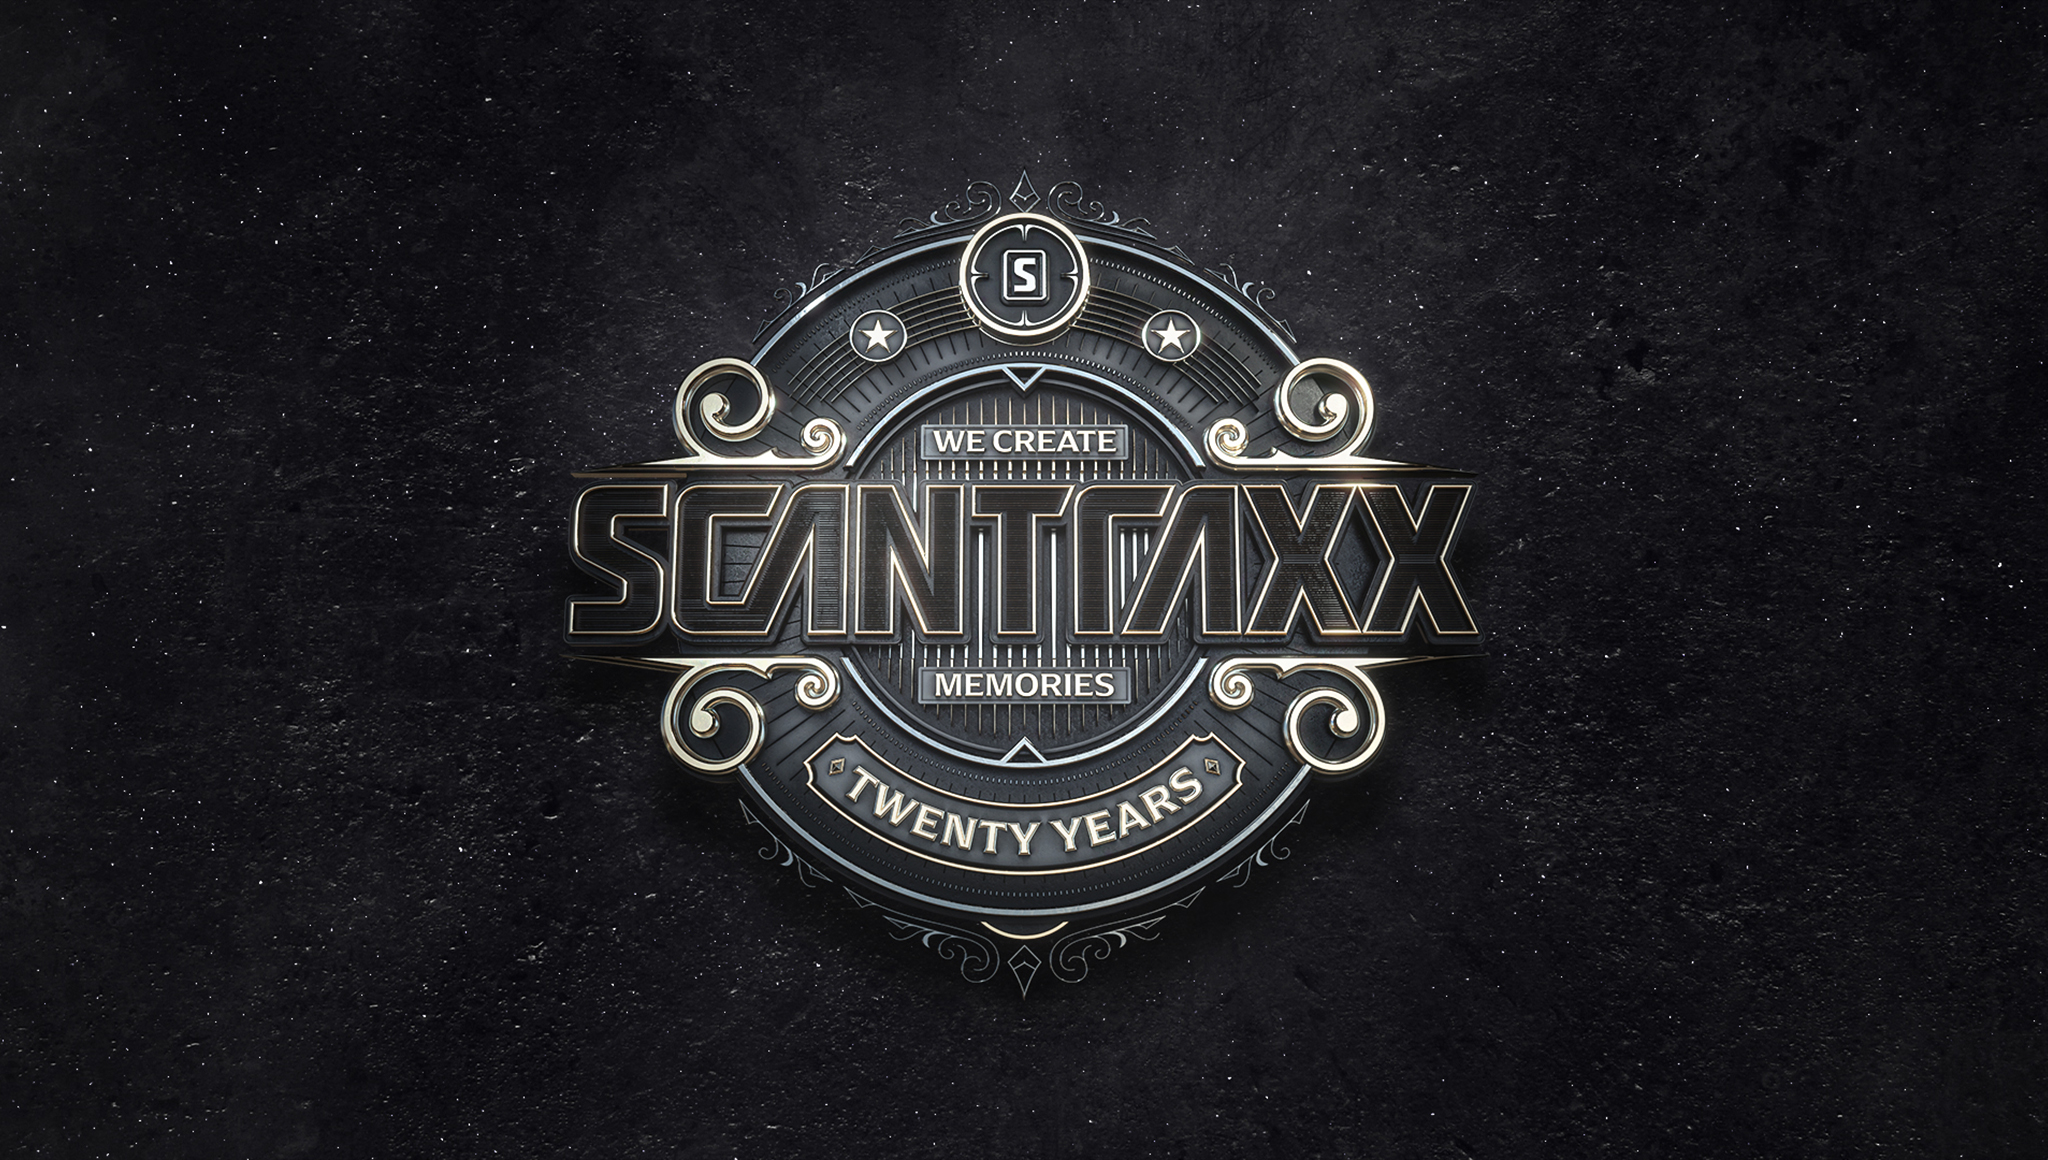 20 Years of Scantraxx 2022